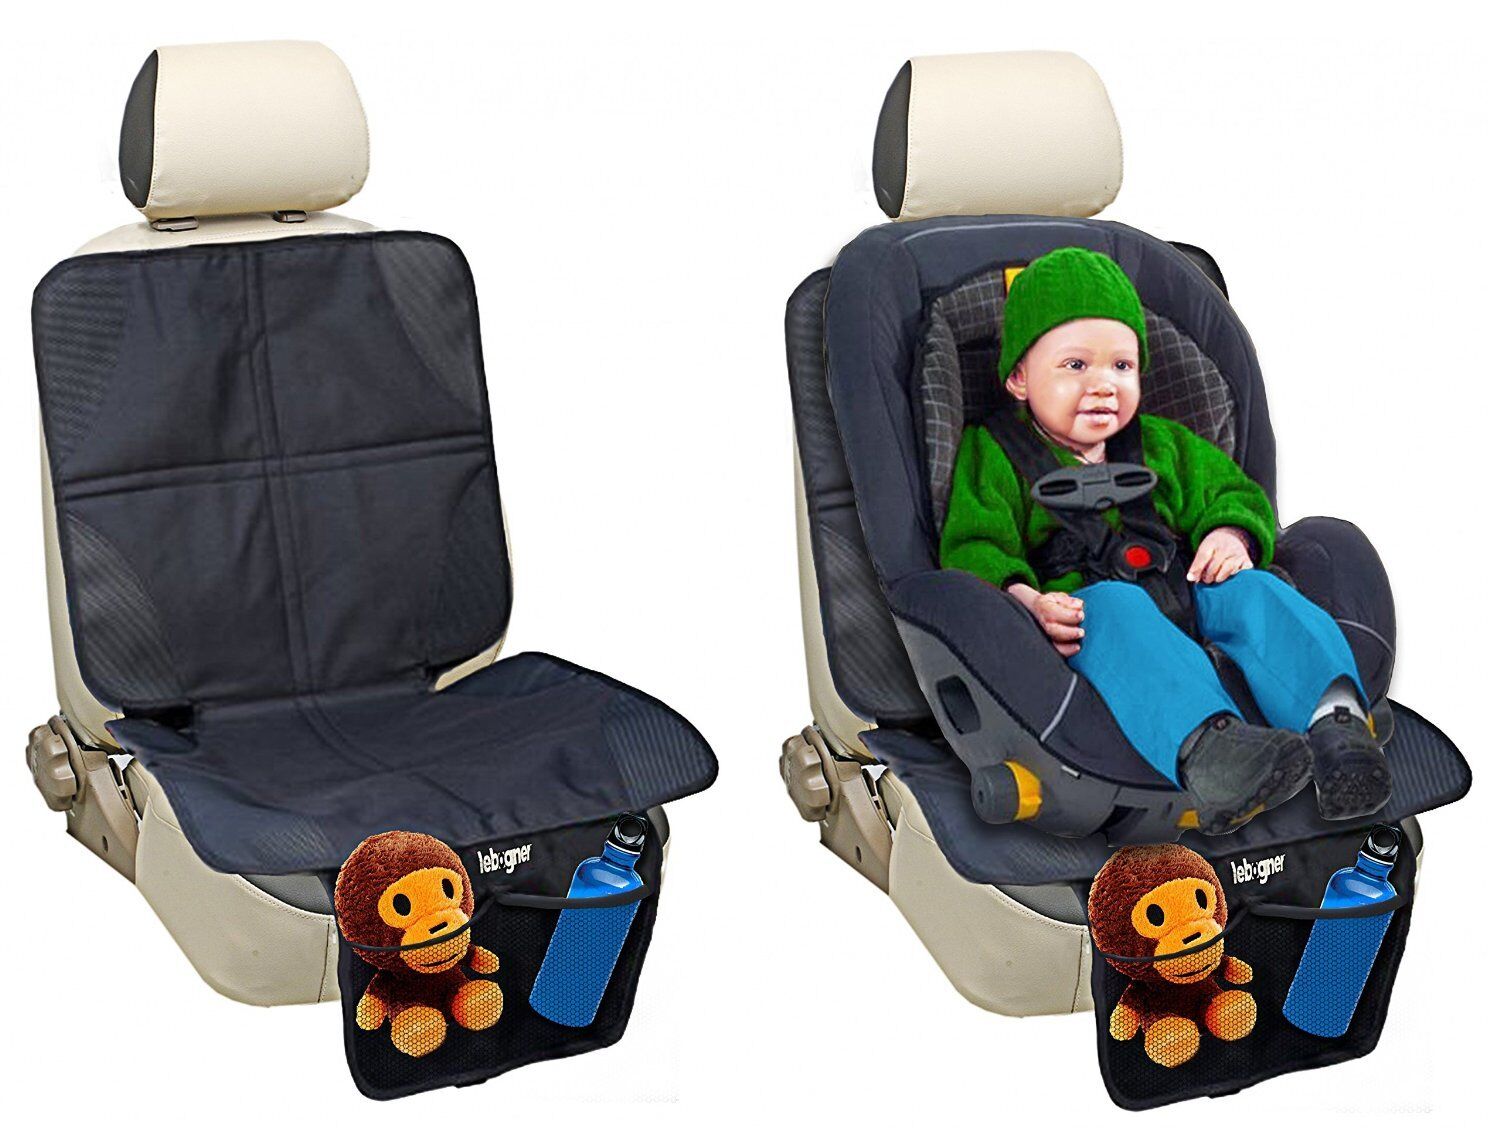 Lebogner Car Seat Protector, Keep Nice And Clean Under Your Baby's Infant Seat.